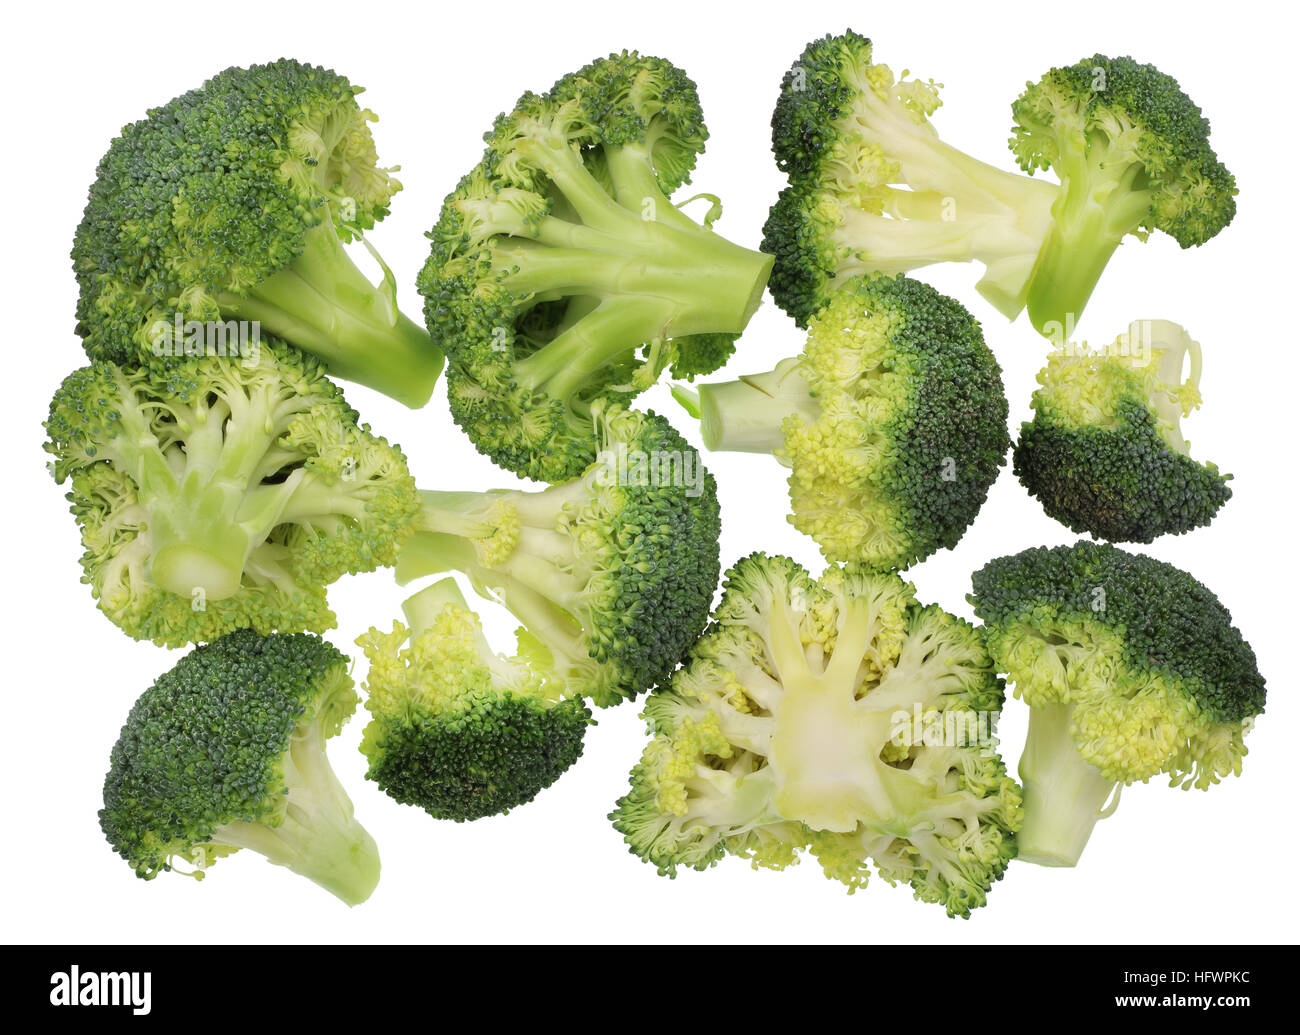 Twelve pieces of fresh green broccoli cabbage  lie on a table of the cook. Isolated top view image Stock Photo